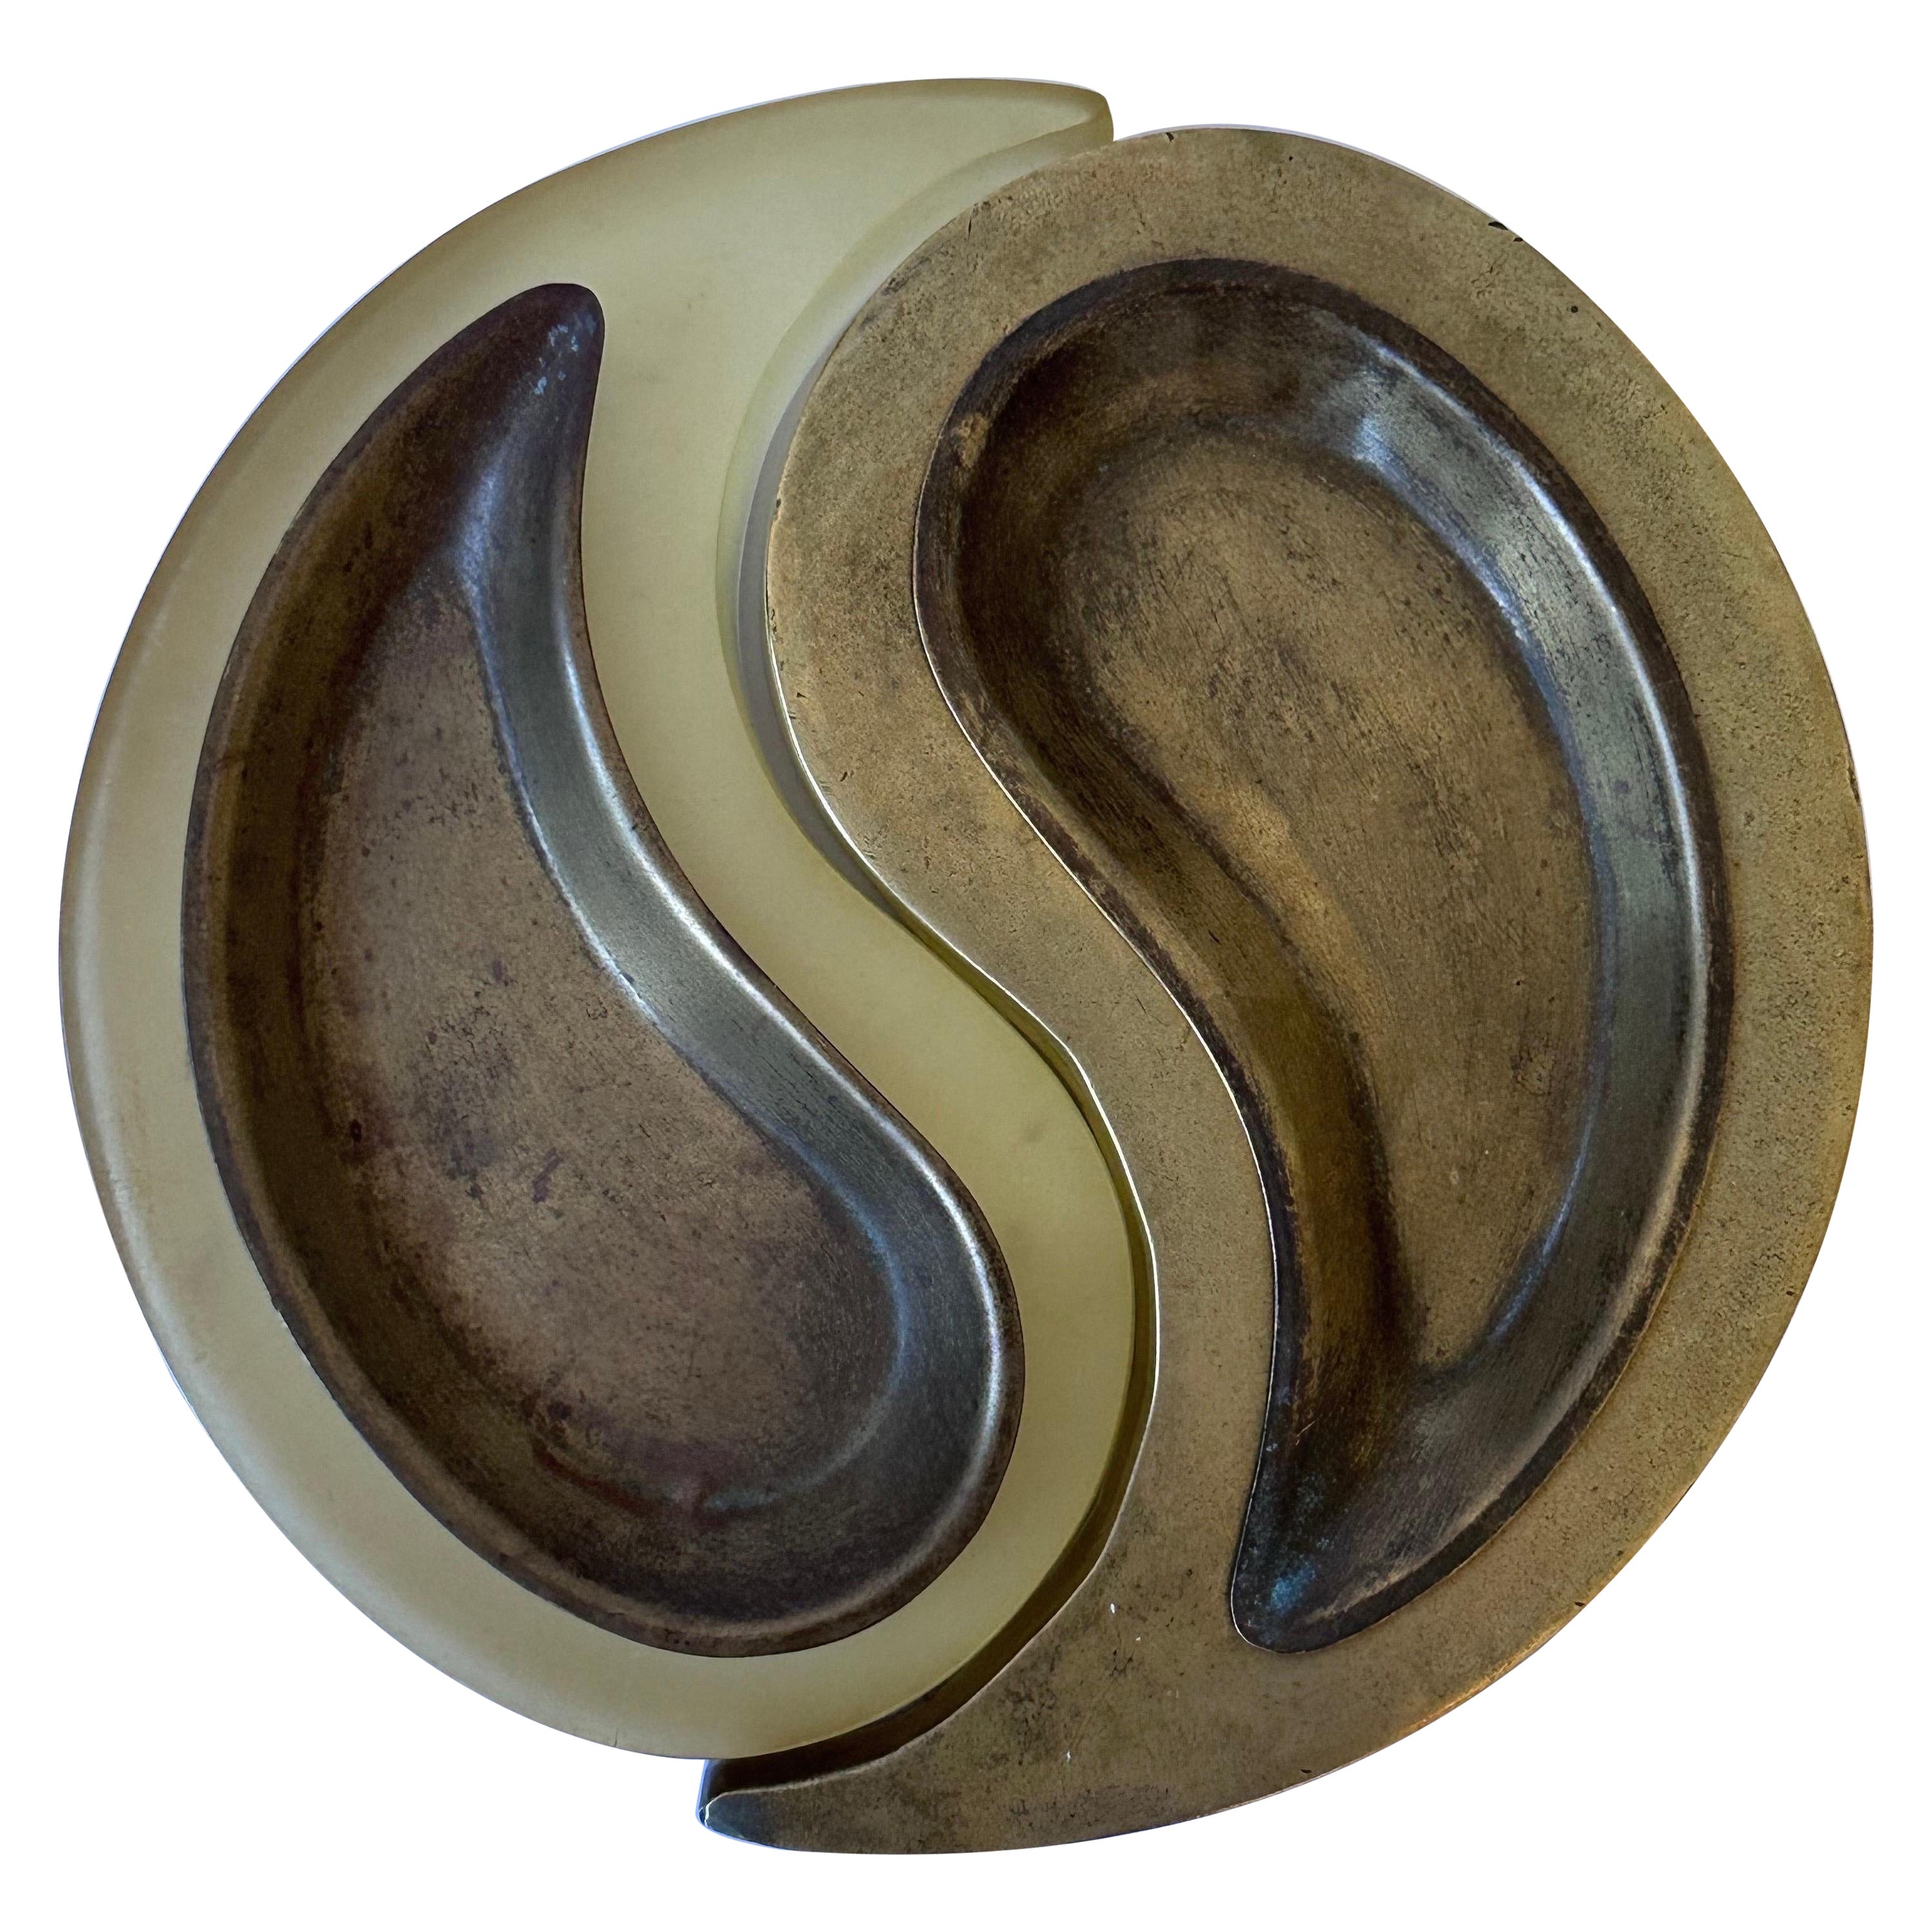 Brazilian Modern Bronze and Acrylic Yin-Yang Ashtray or Catchall Tray, 1980s For Sale